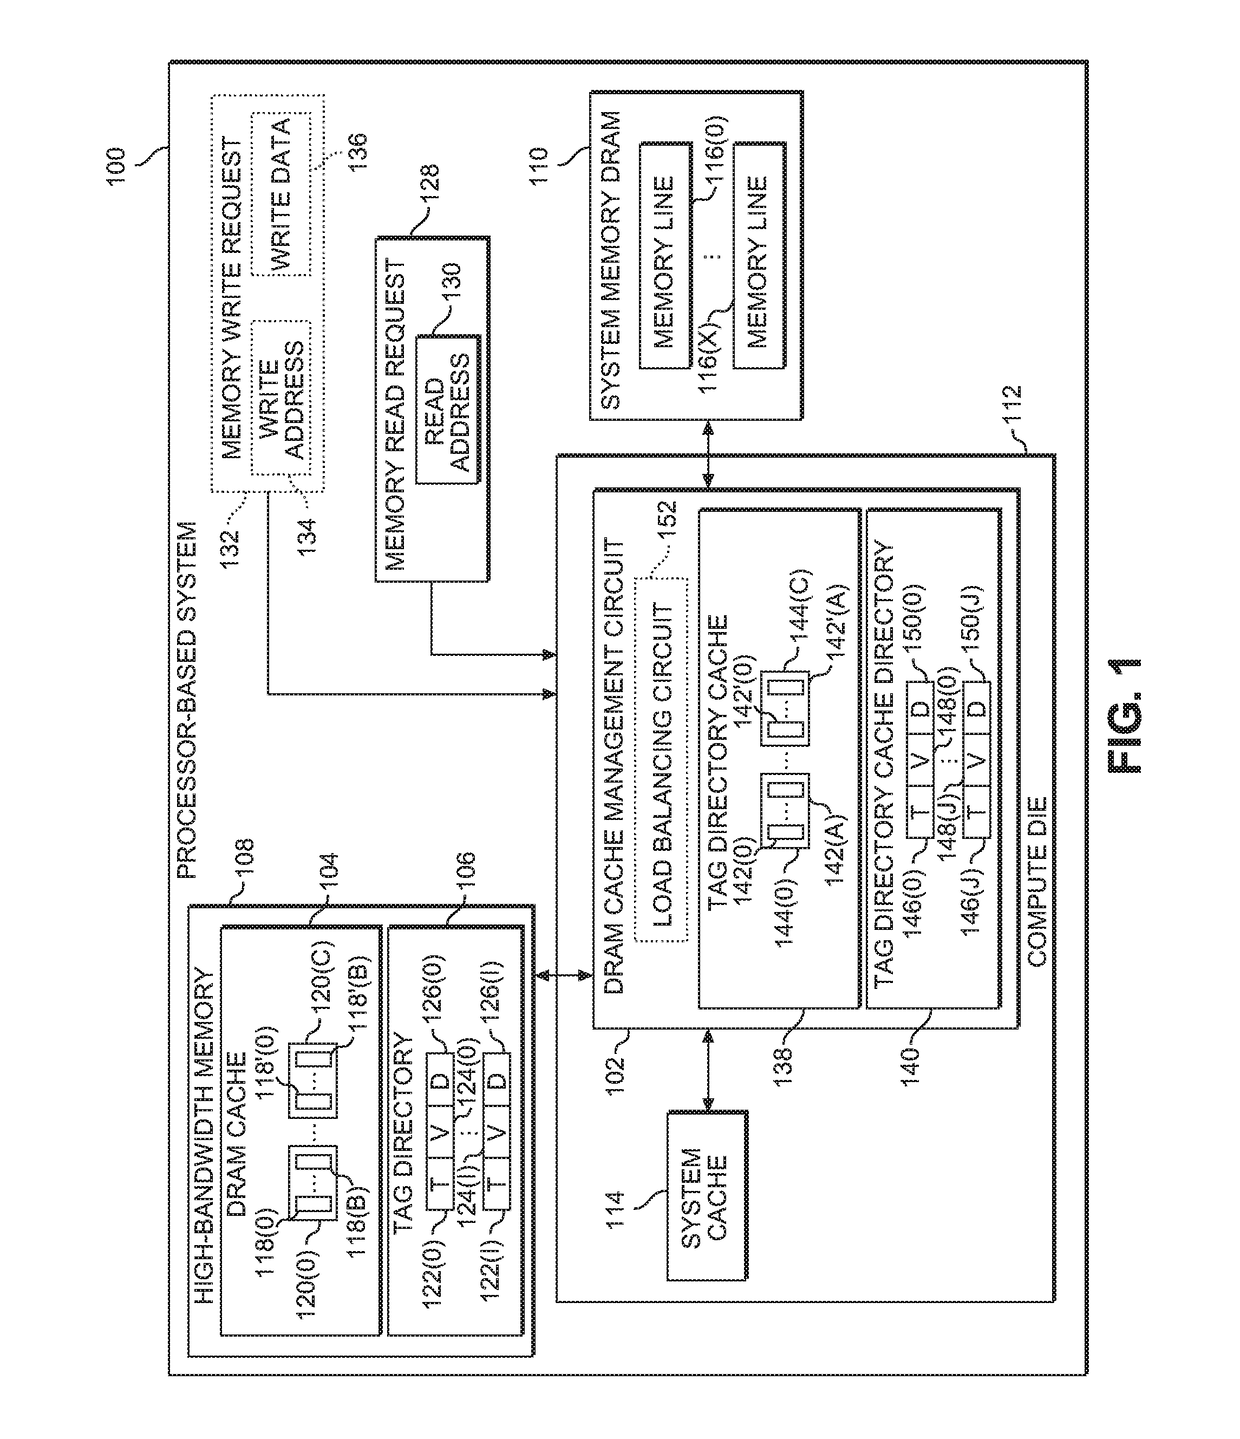 Providing scalable dynamic random access memory (DRAM) cache management using tag directory caches